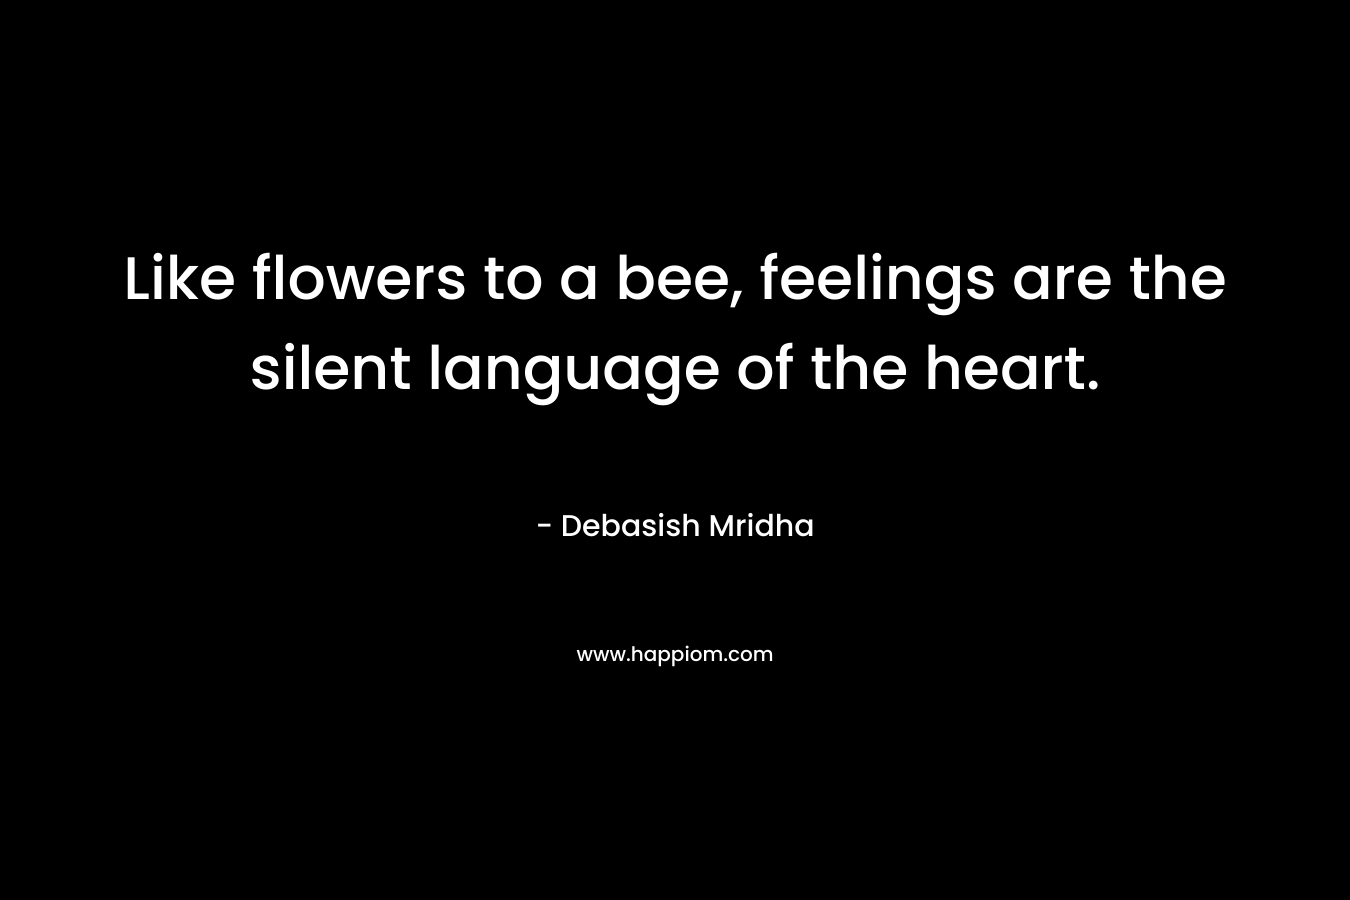 Like flowers to a bee, feelings are the silent language of the heart. – Debasish Mridha